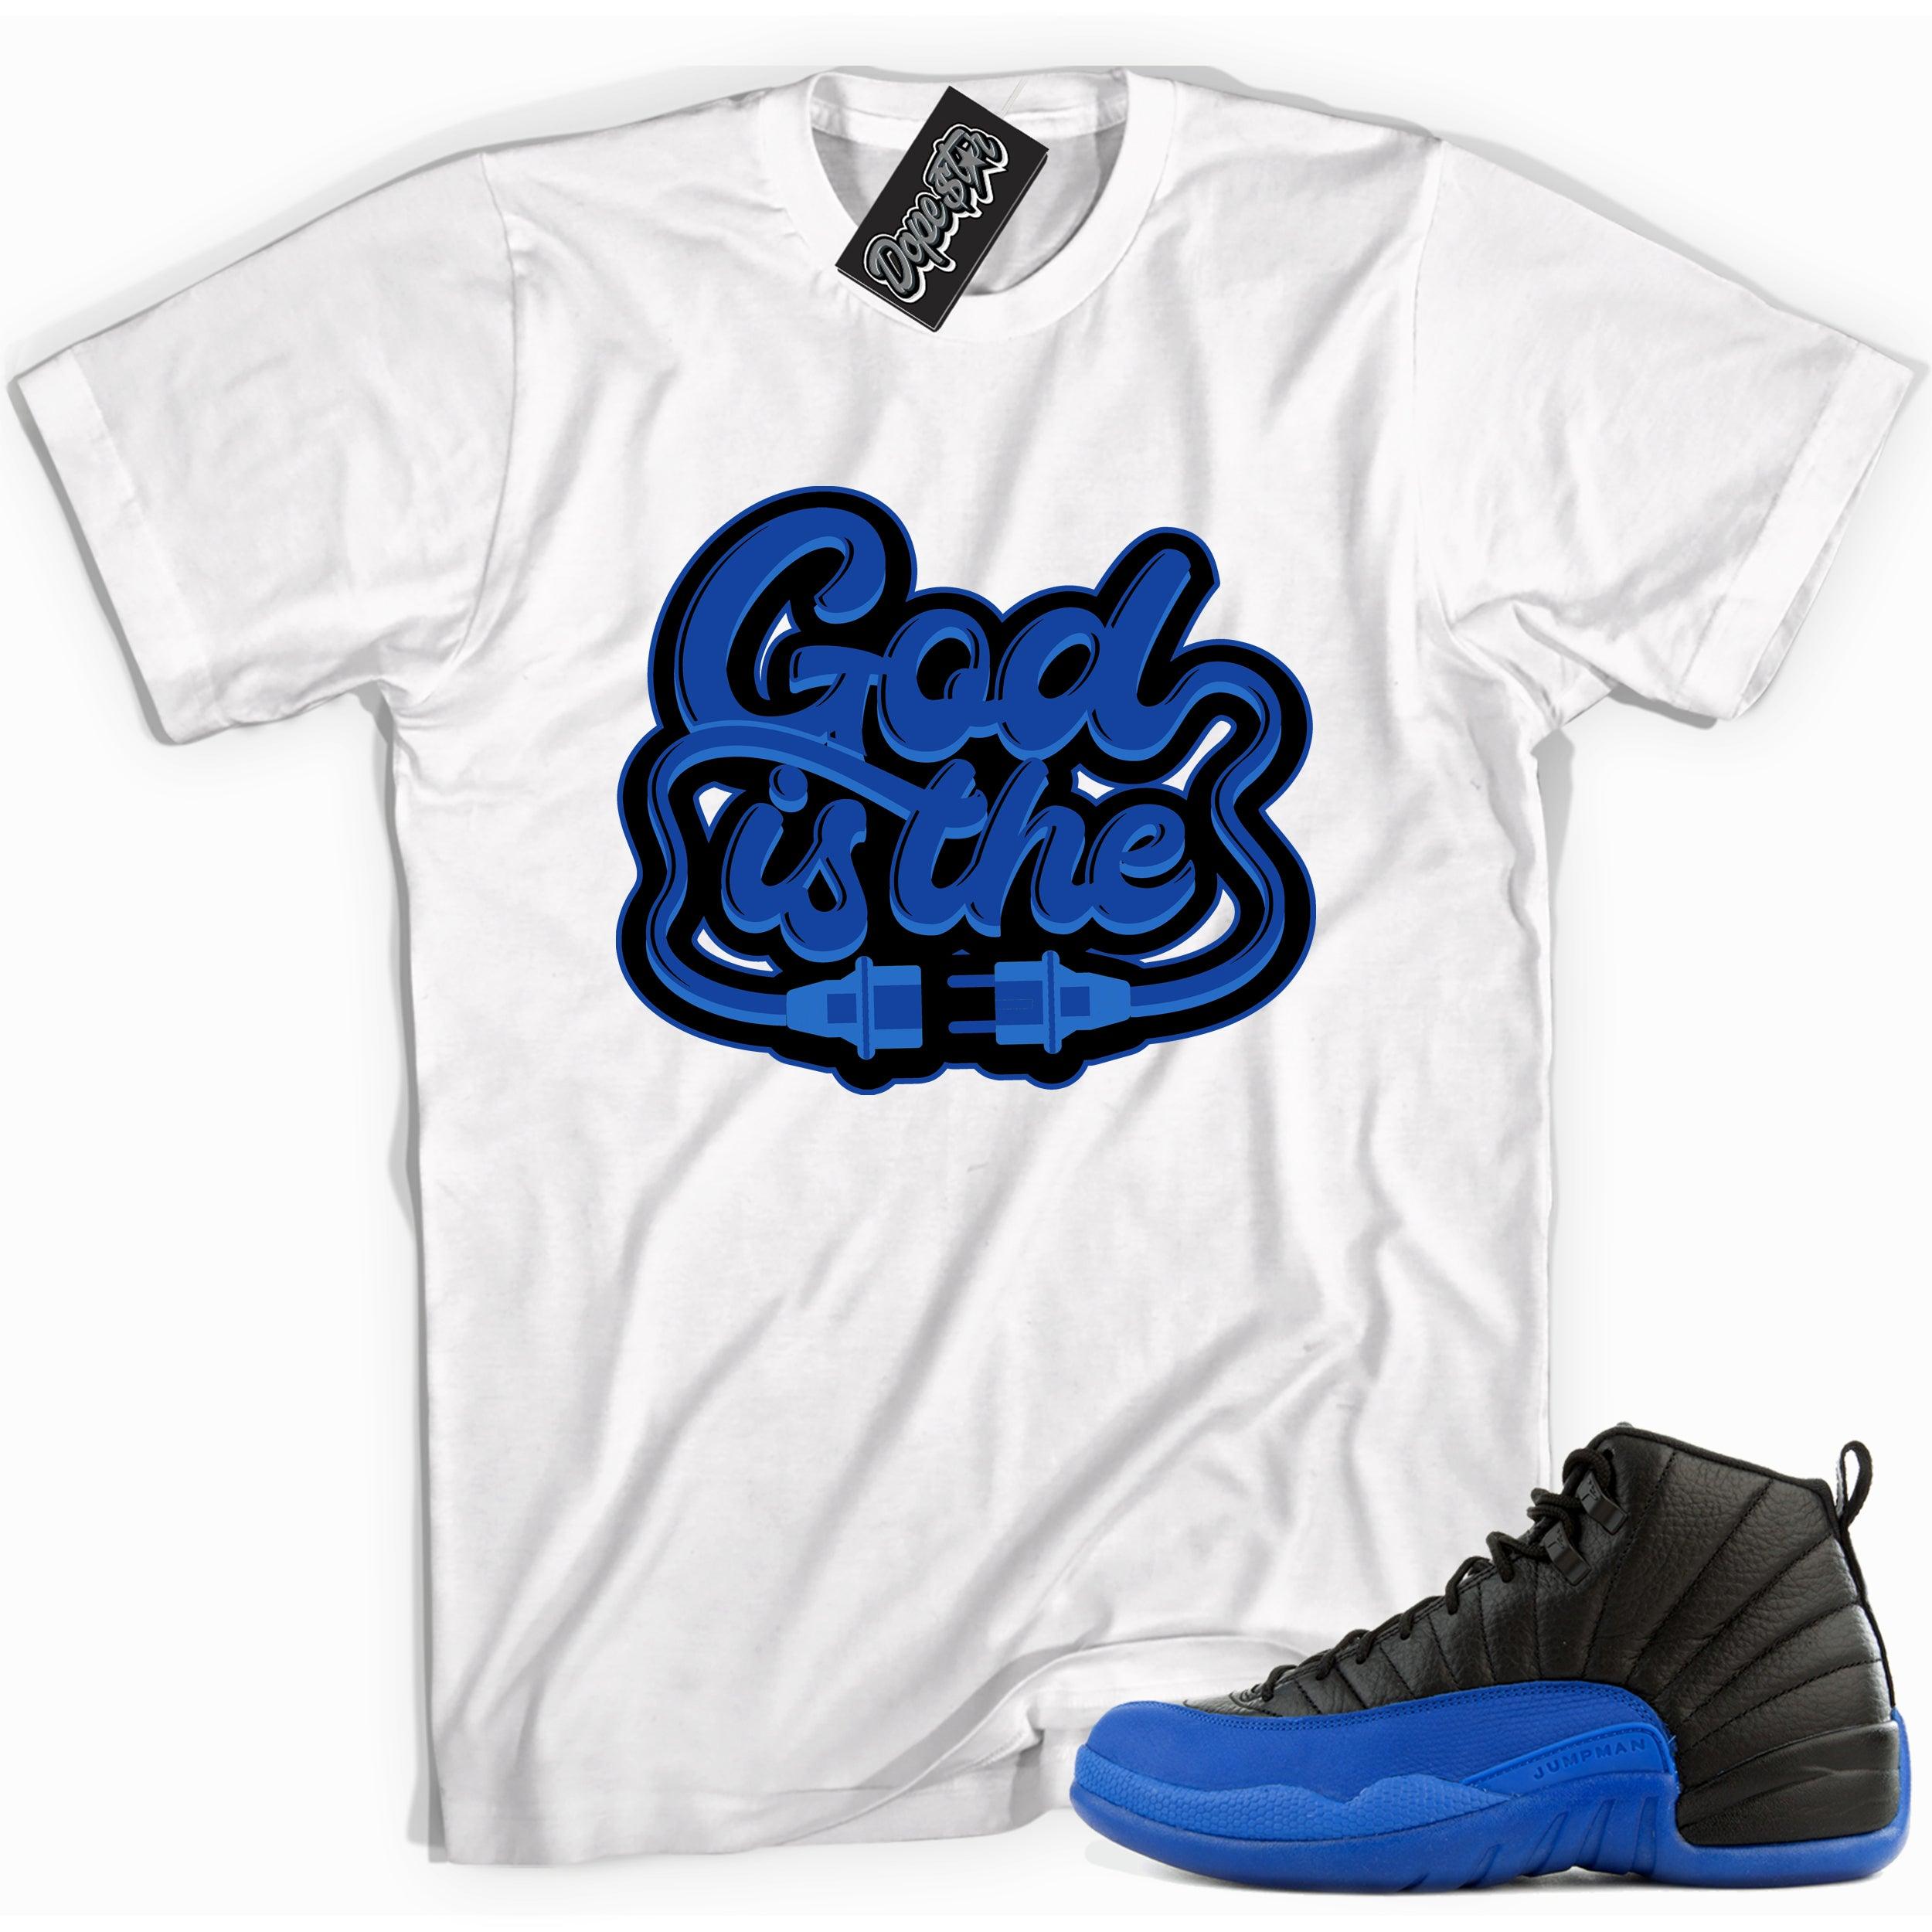 Cool white graphic tee with 'god is the plug' print, that perfectly matches Air Jordan 12 Retro Black Game Royal sneakers.